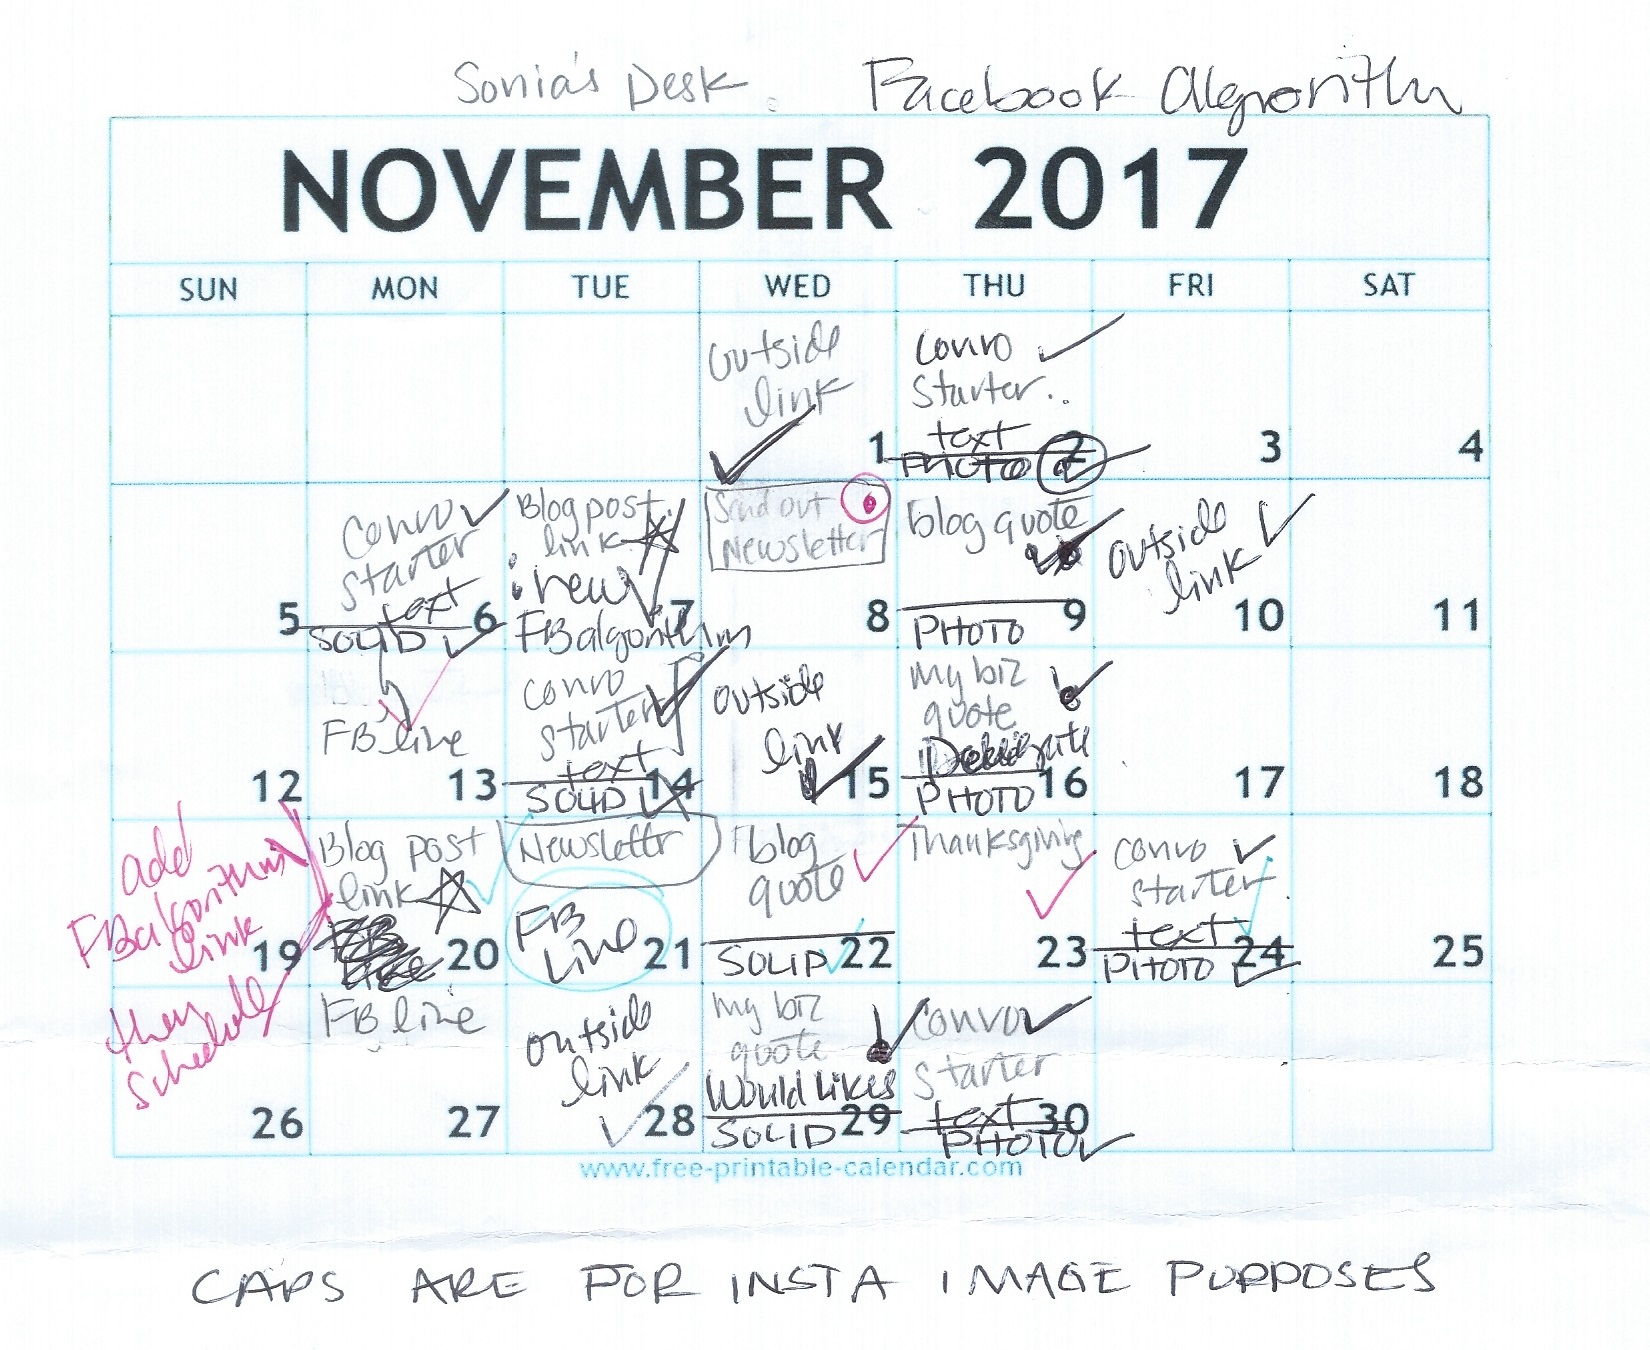 monthly editorial calendar planning example